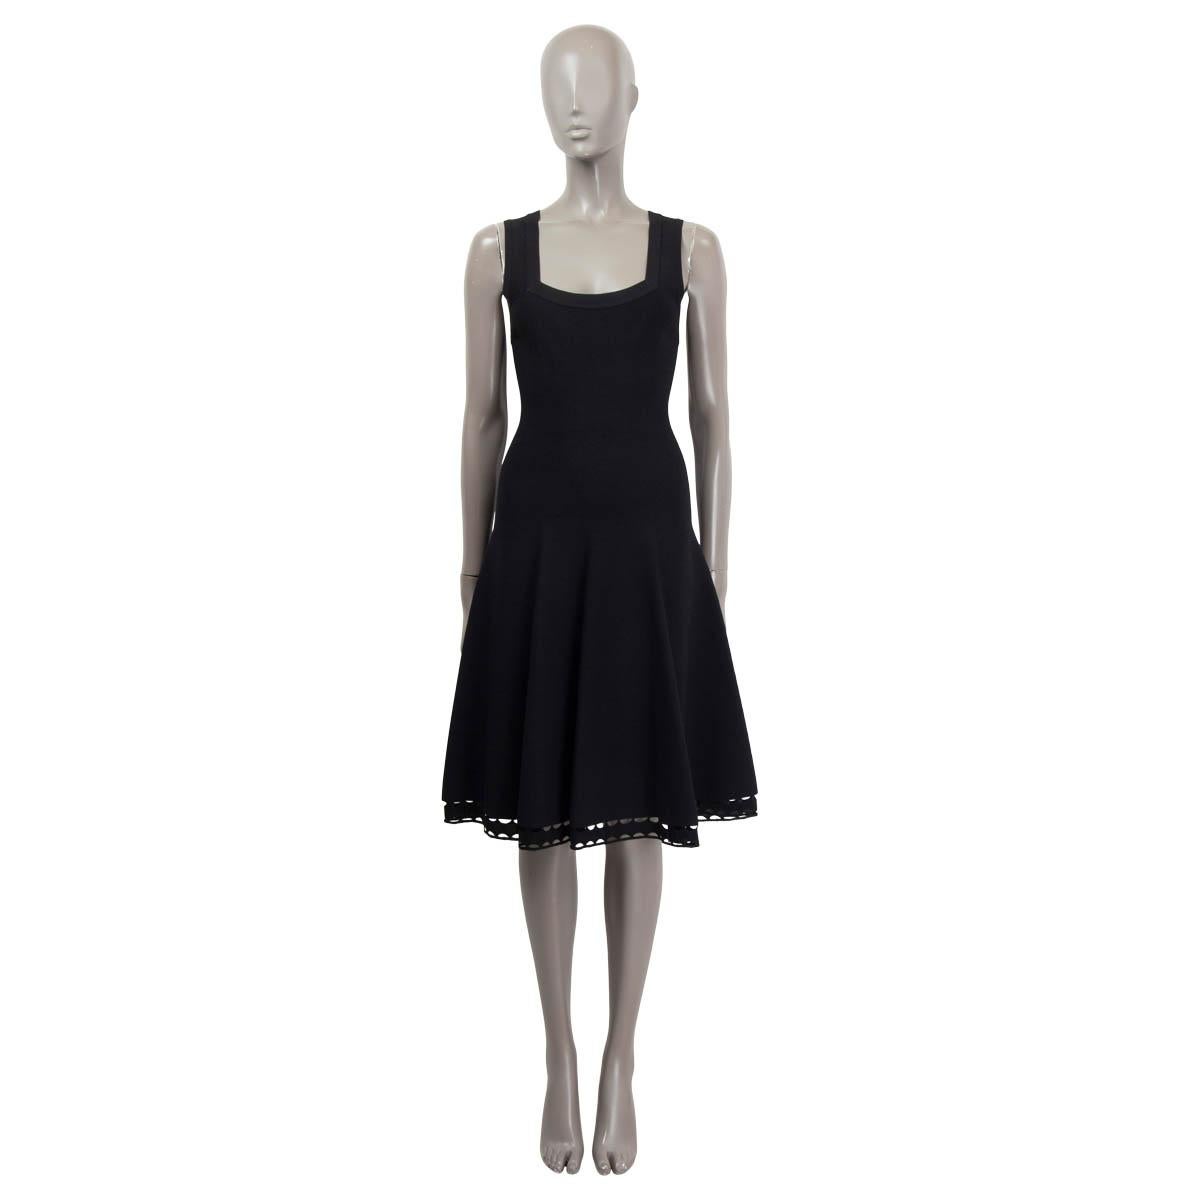 100% authentic Alaïa sleeveless flared dress in black viscose (82%), polyester (10%) and polyamide (6%). Features square neckline and perforated hem. Opens with a zipper on the back. Has been worn and is in excellent condition. 

Measurements
Tag